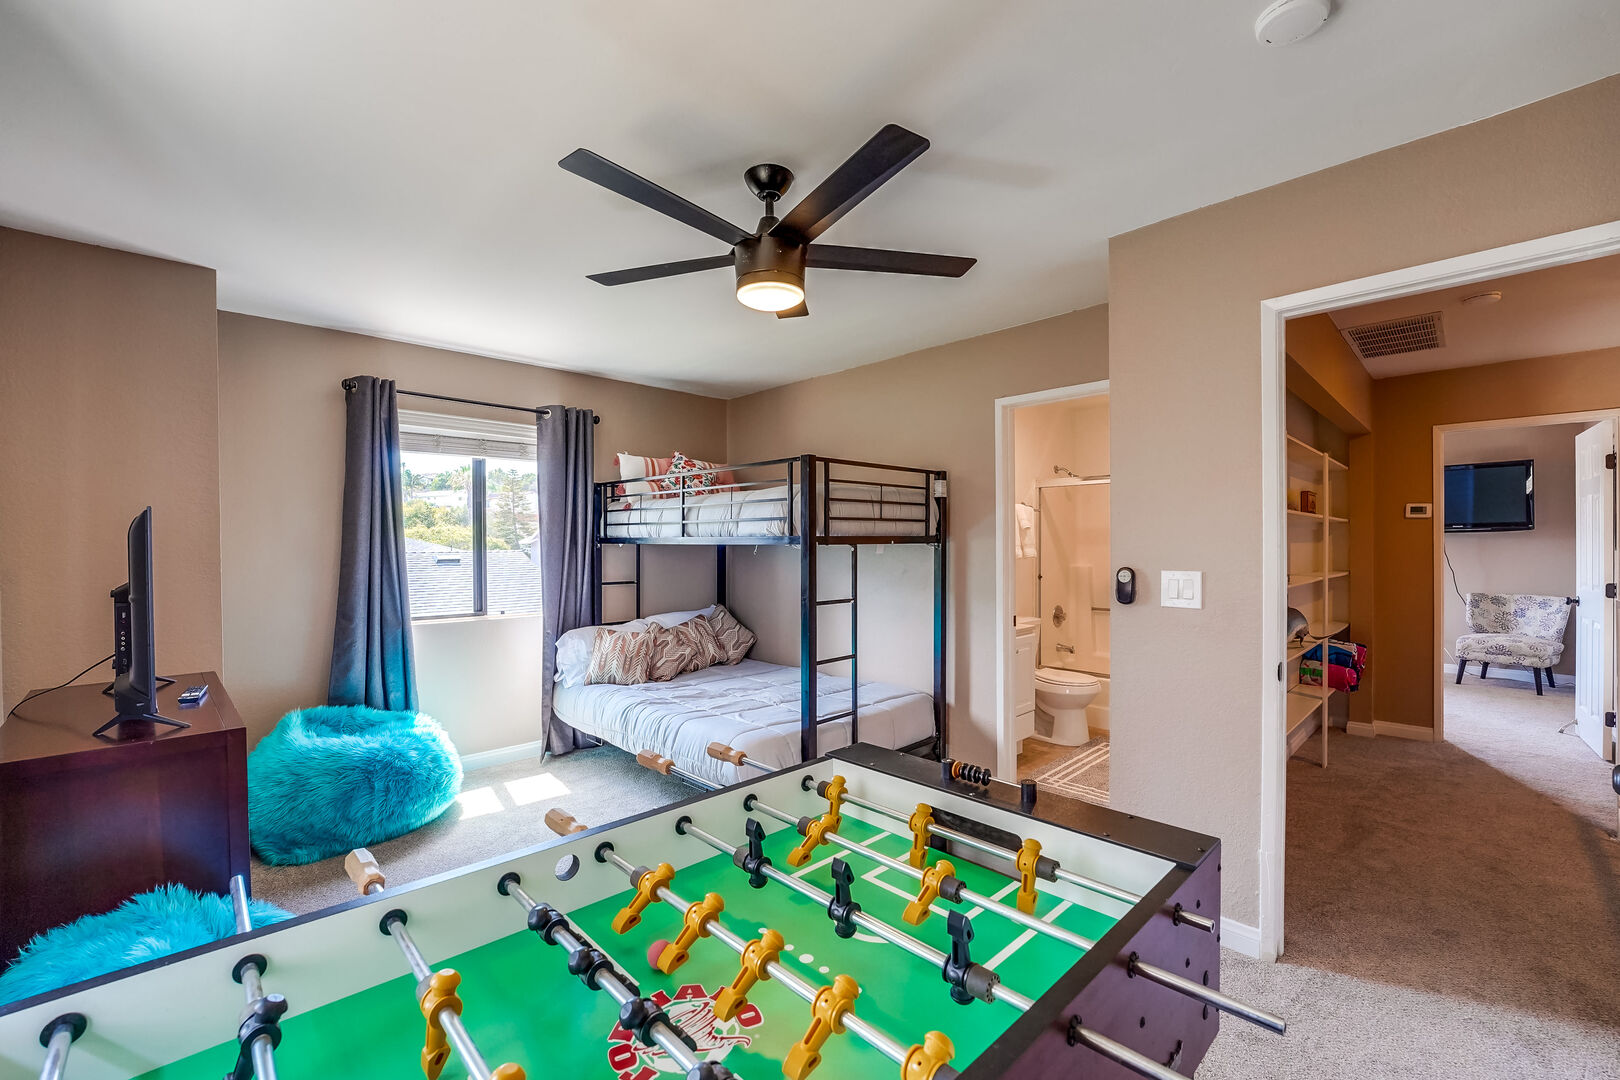 Upstairs guest room, perfect for kids! Full size bottom bunk and twin size top bunk beds. Remote control ceiling fan and light. Foosball table, hallway shelves full of board games, fuzzy bean bag chairs and smart TV. Closet and dresser storage with in-suite full bathroom.